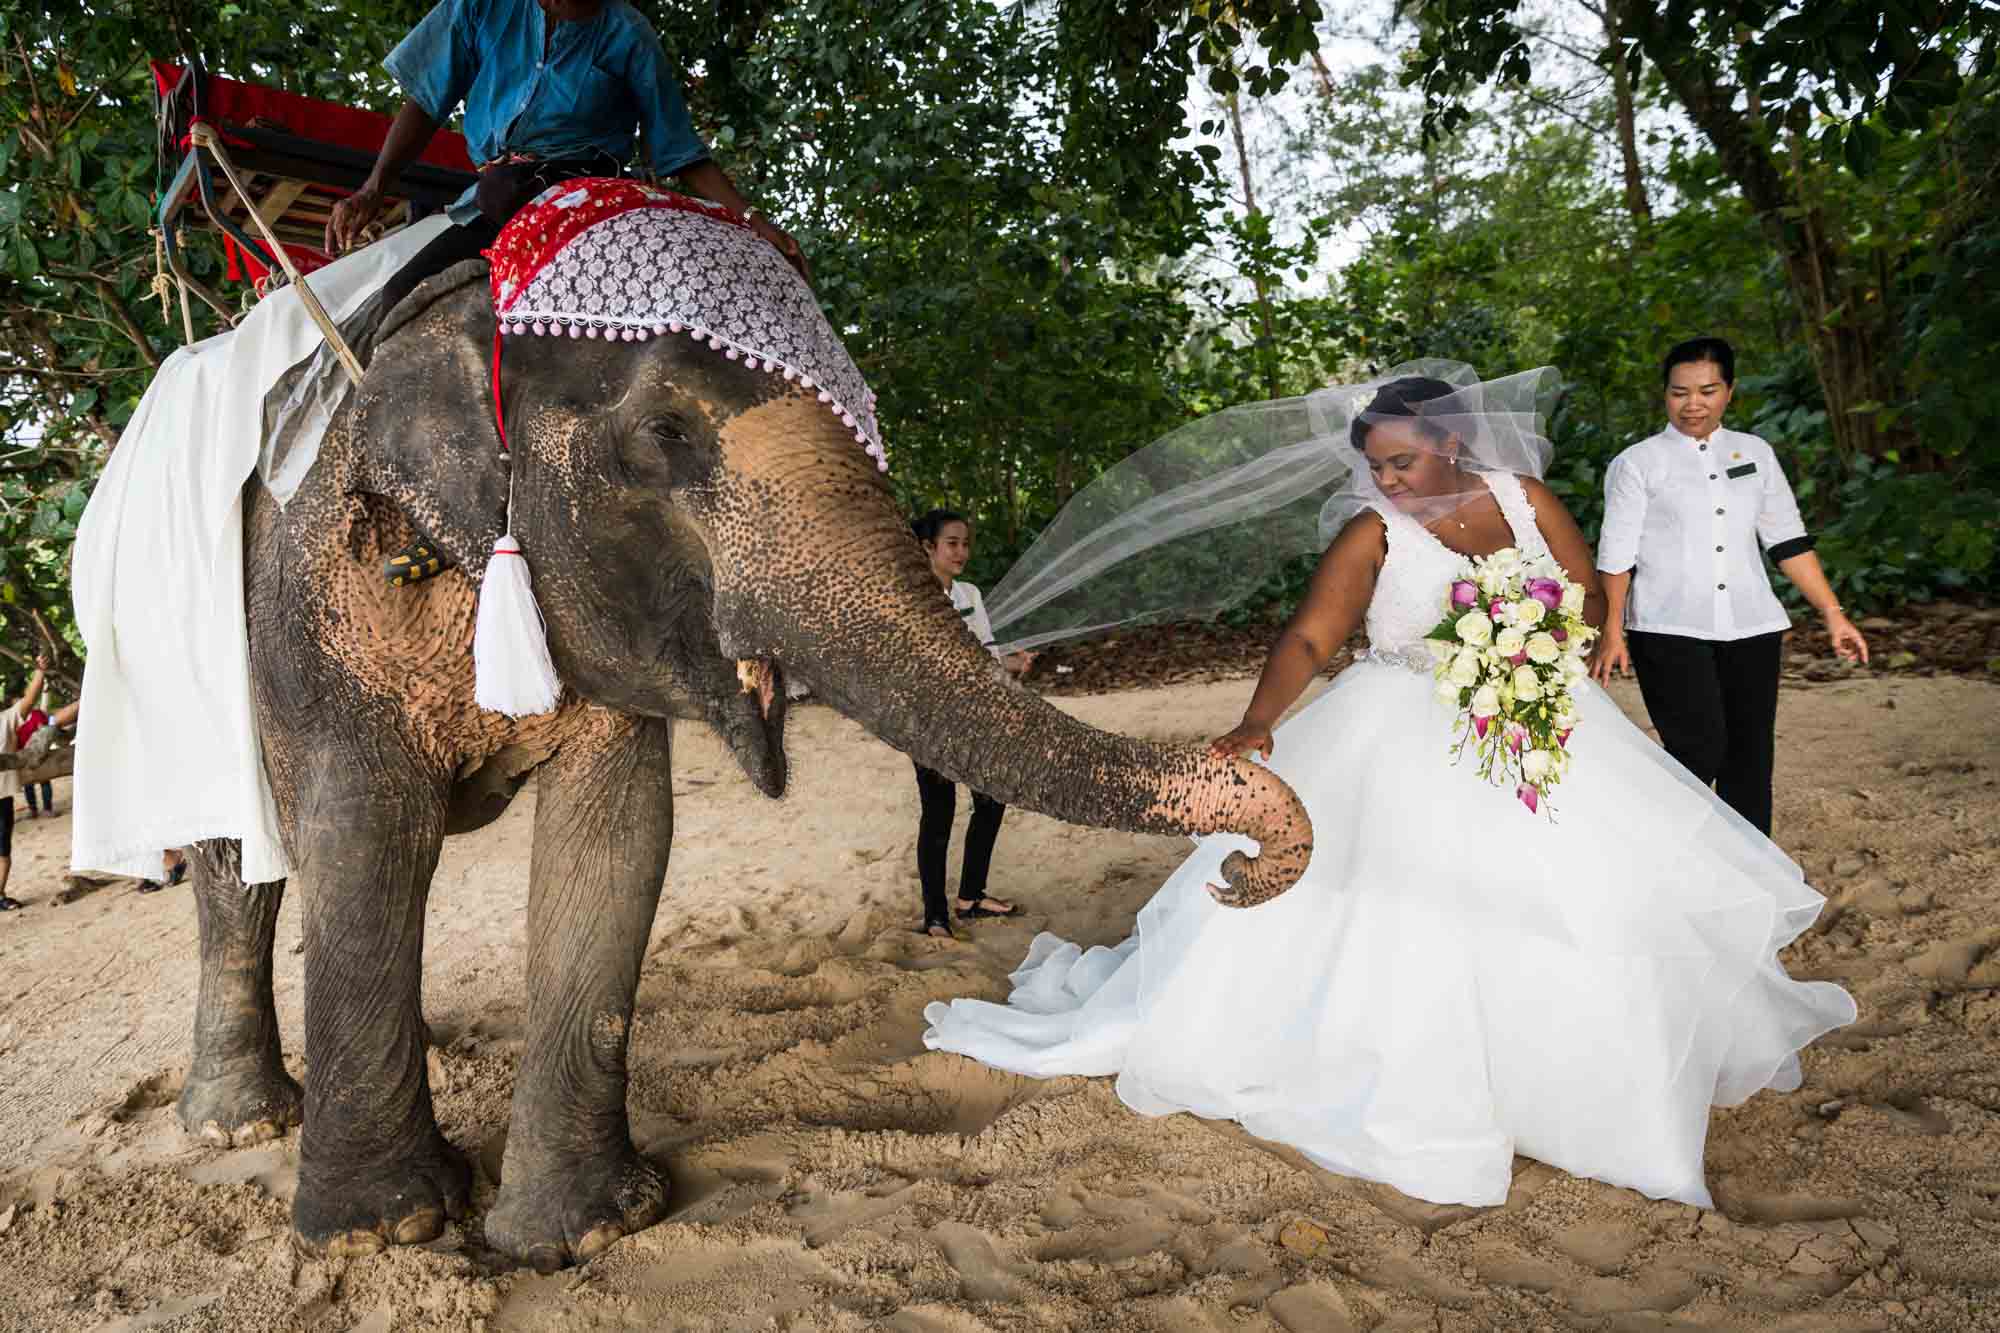 Bride with elephant for an article on destination wedding planning tips